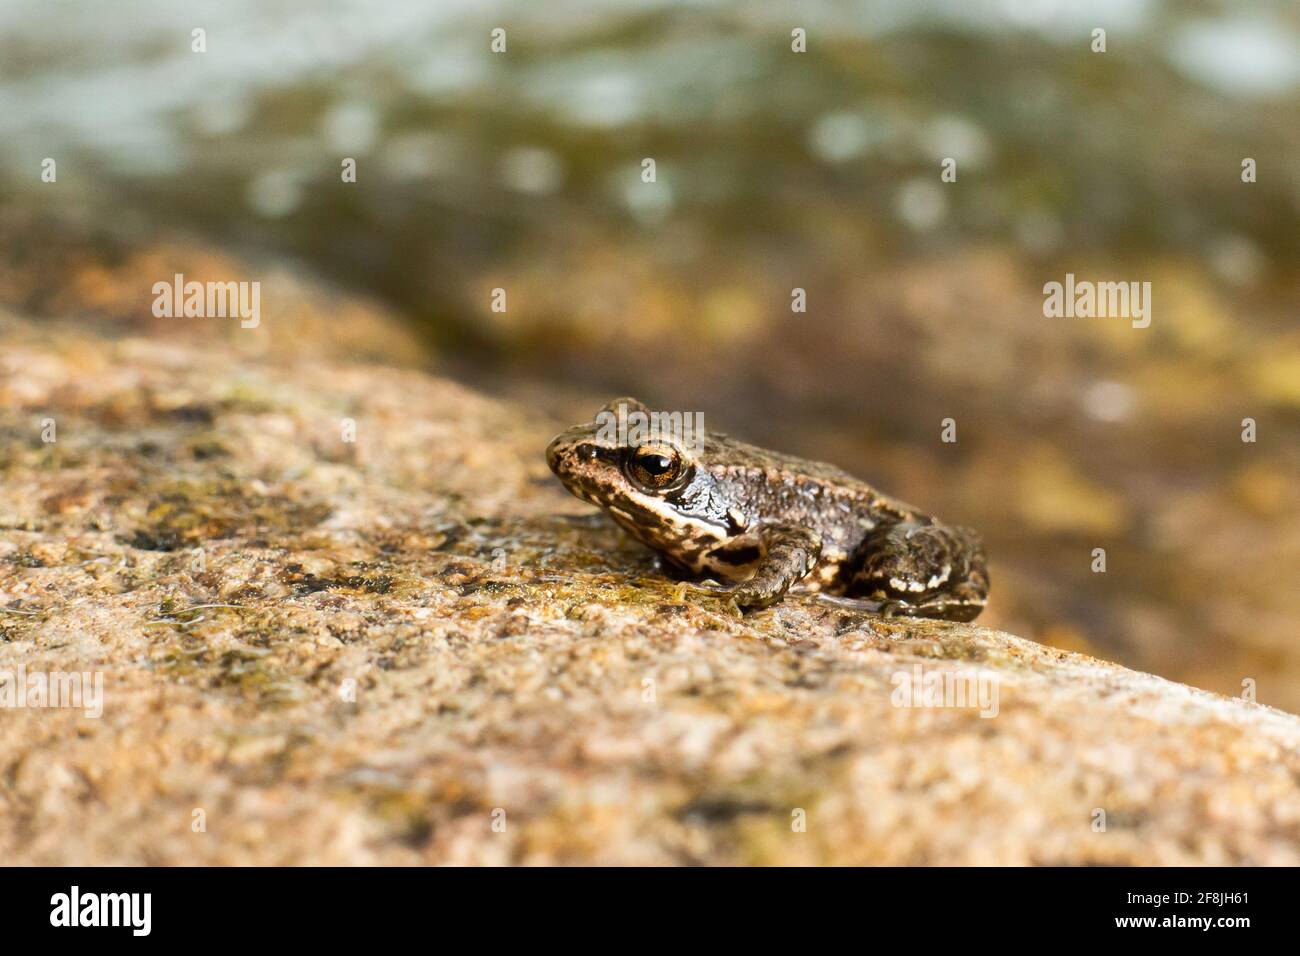 Frog on a rock with unfocused background Stock Photo